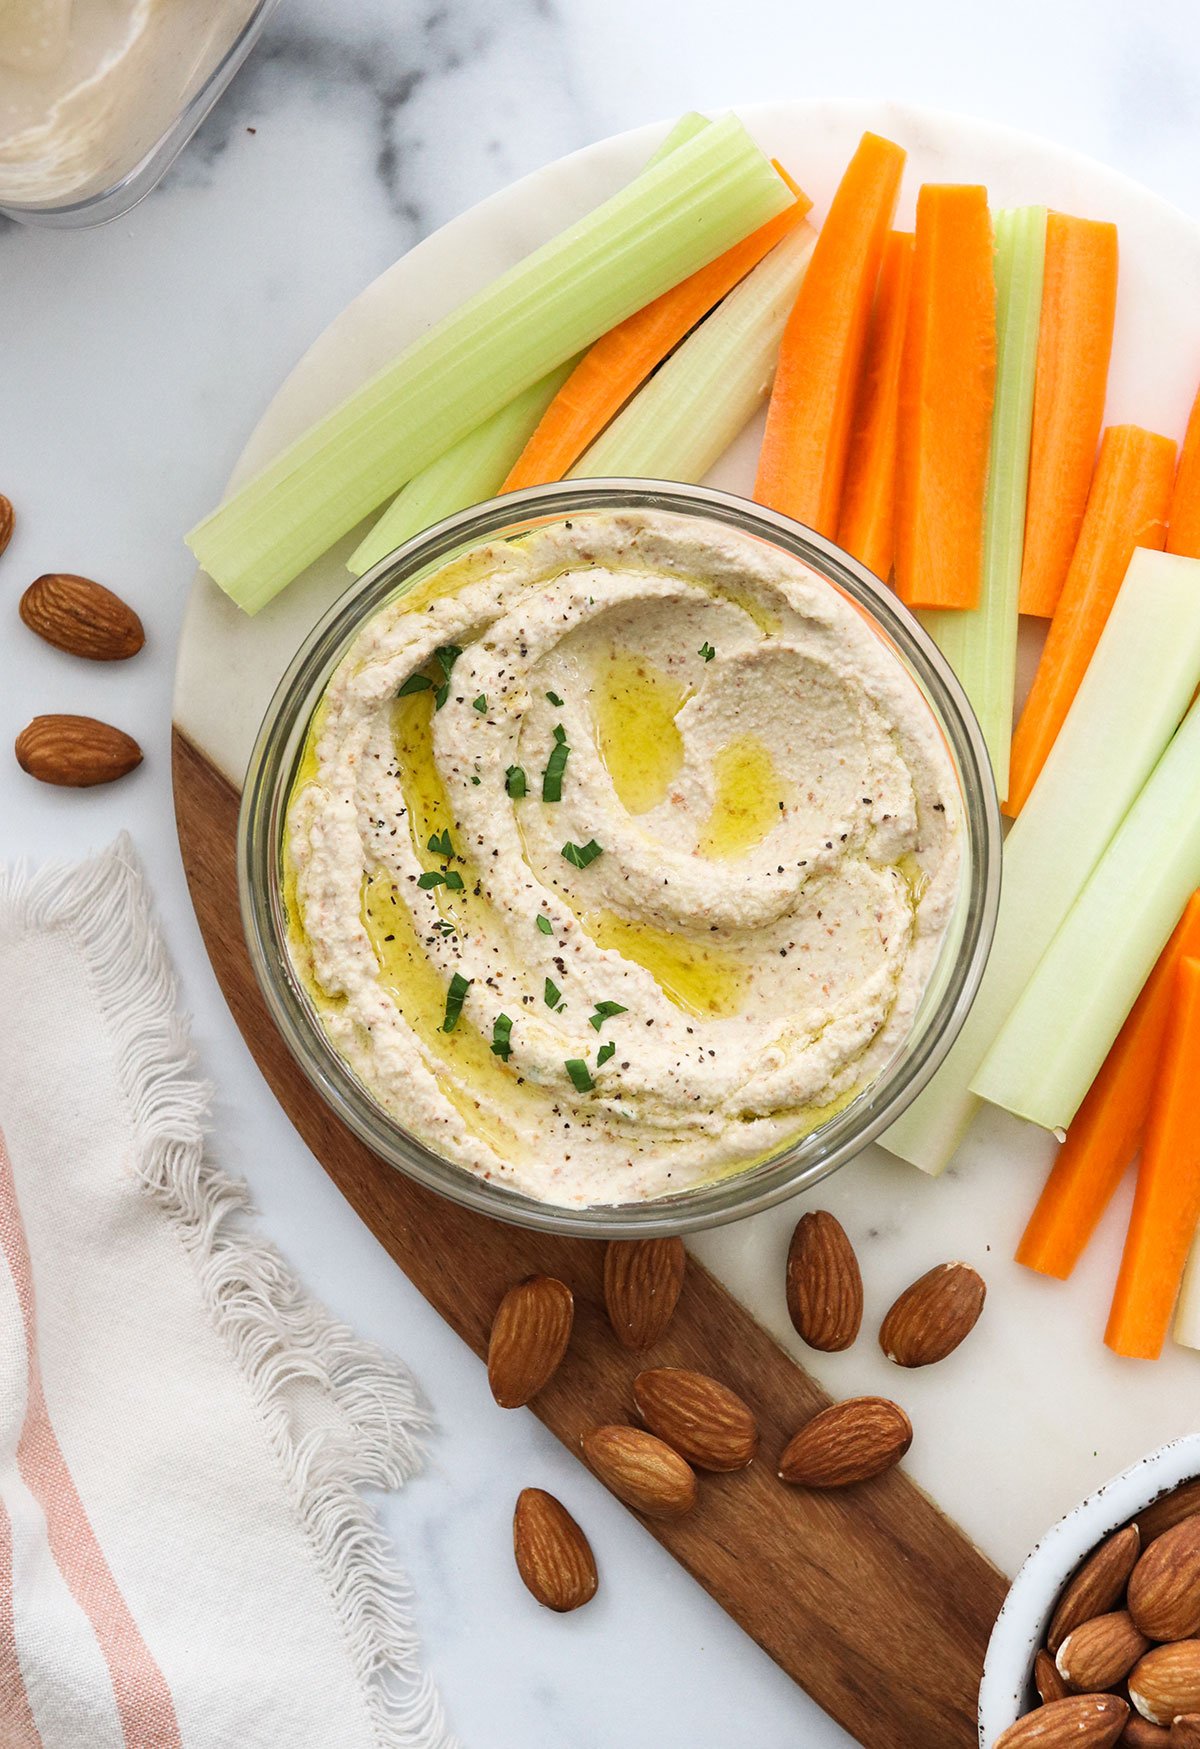 almond pulp hummus served with carrots and celery sticks.